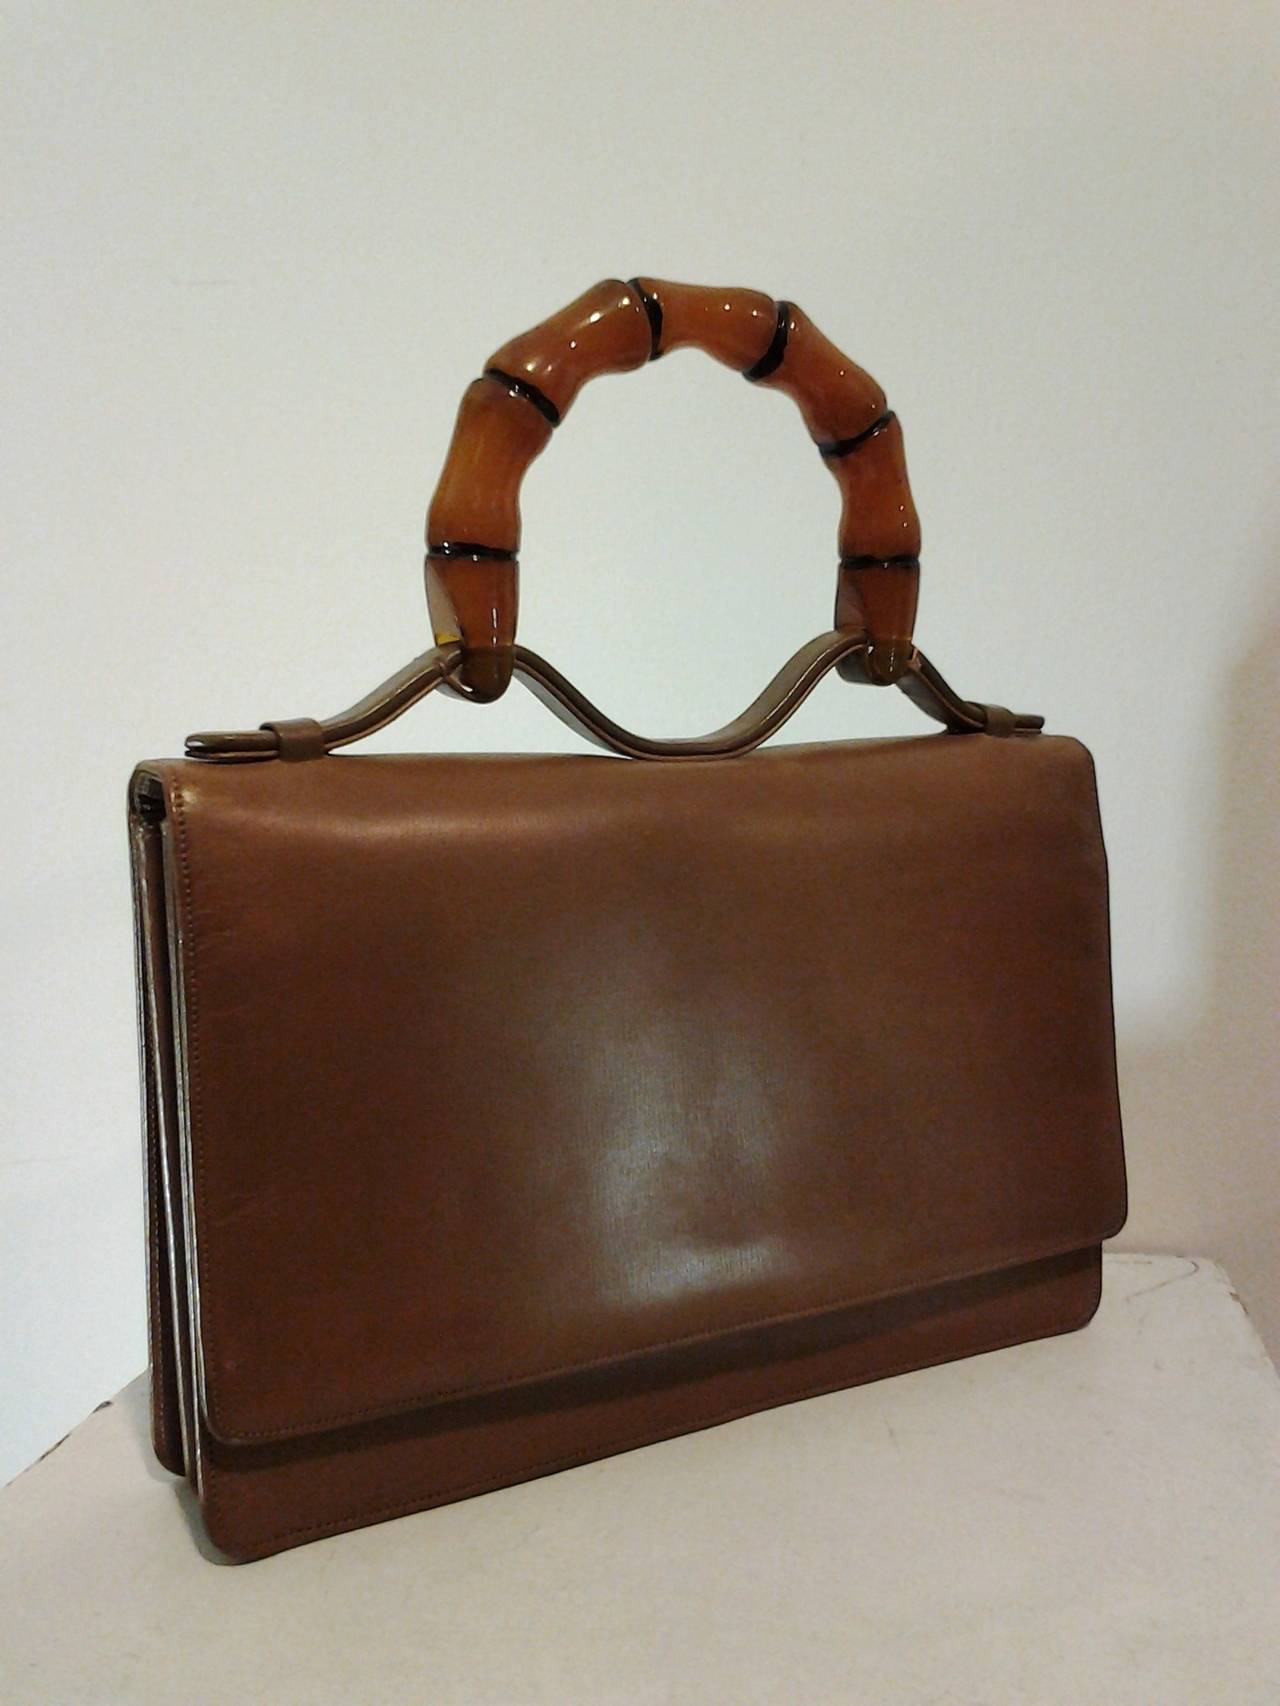 A fabulous and smart 1960s Harry Rosenfeld accordion style, camel colored leather handbag with stunning lucite faux bamboo handle,.